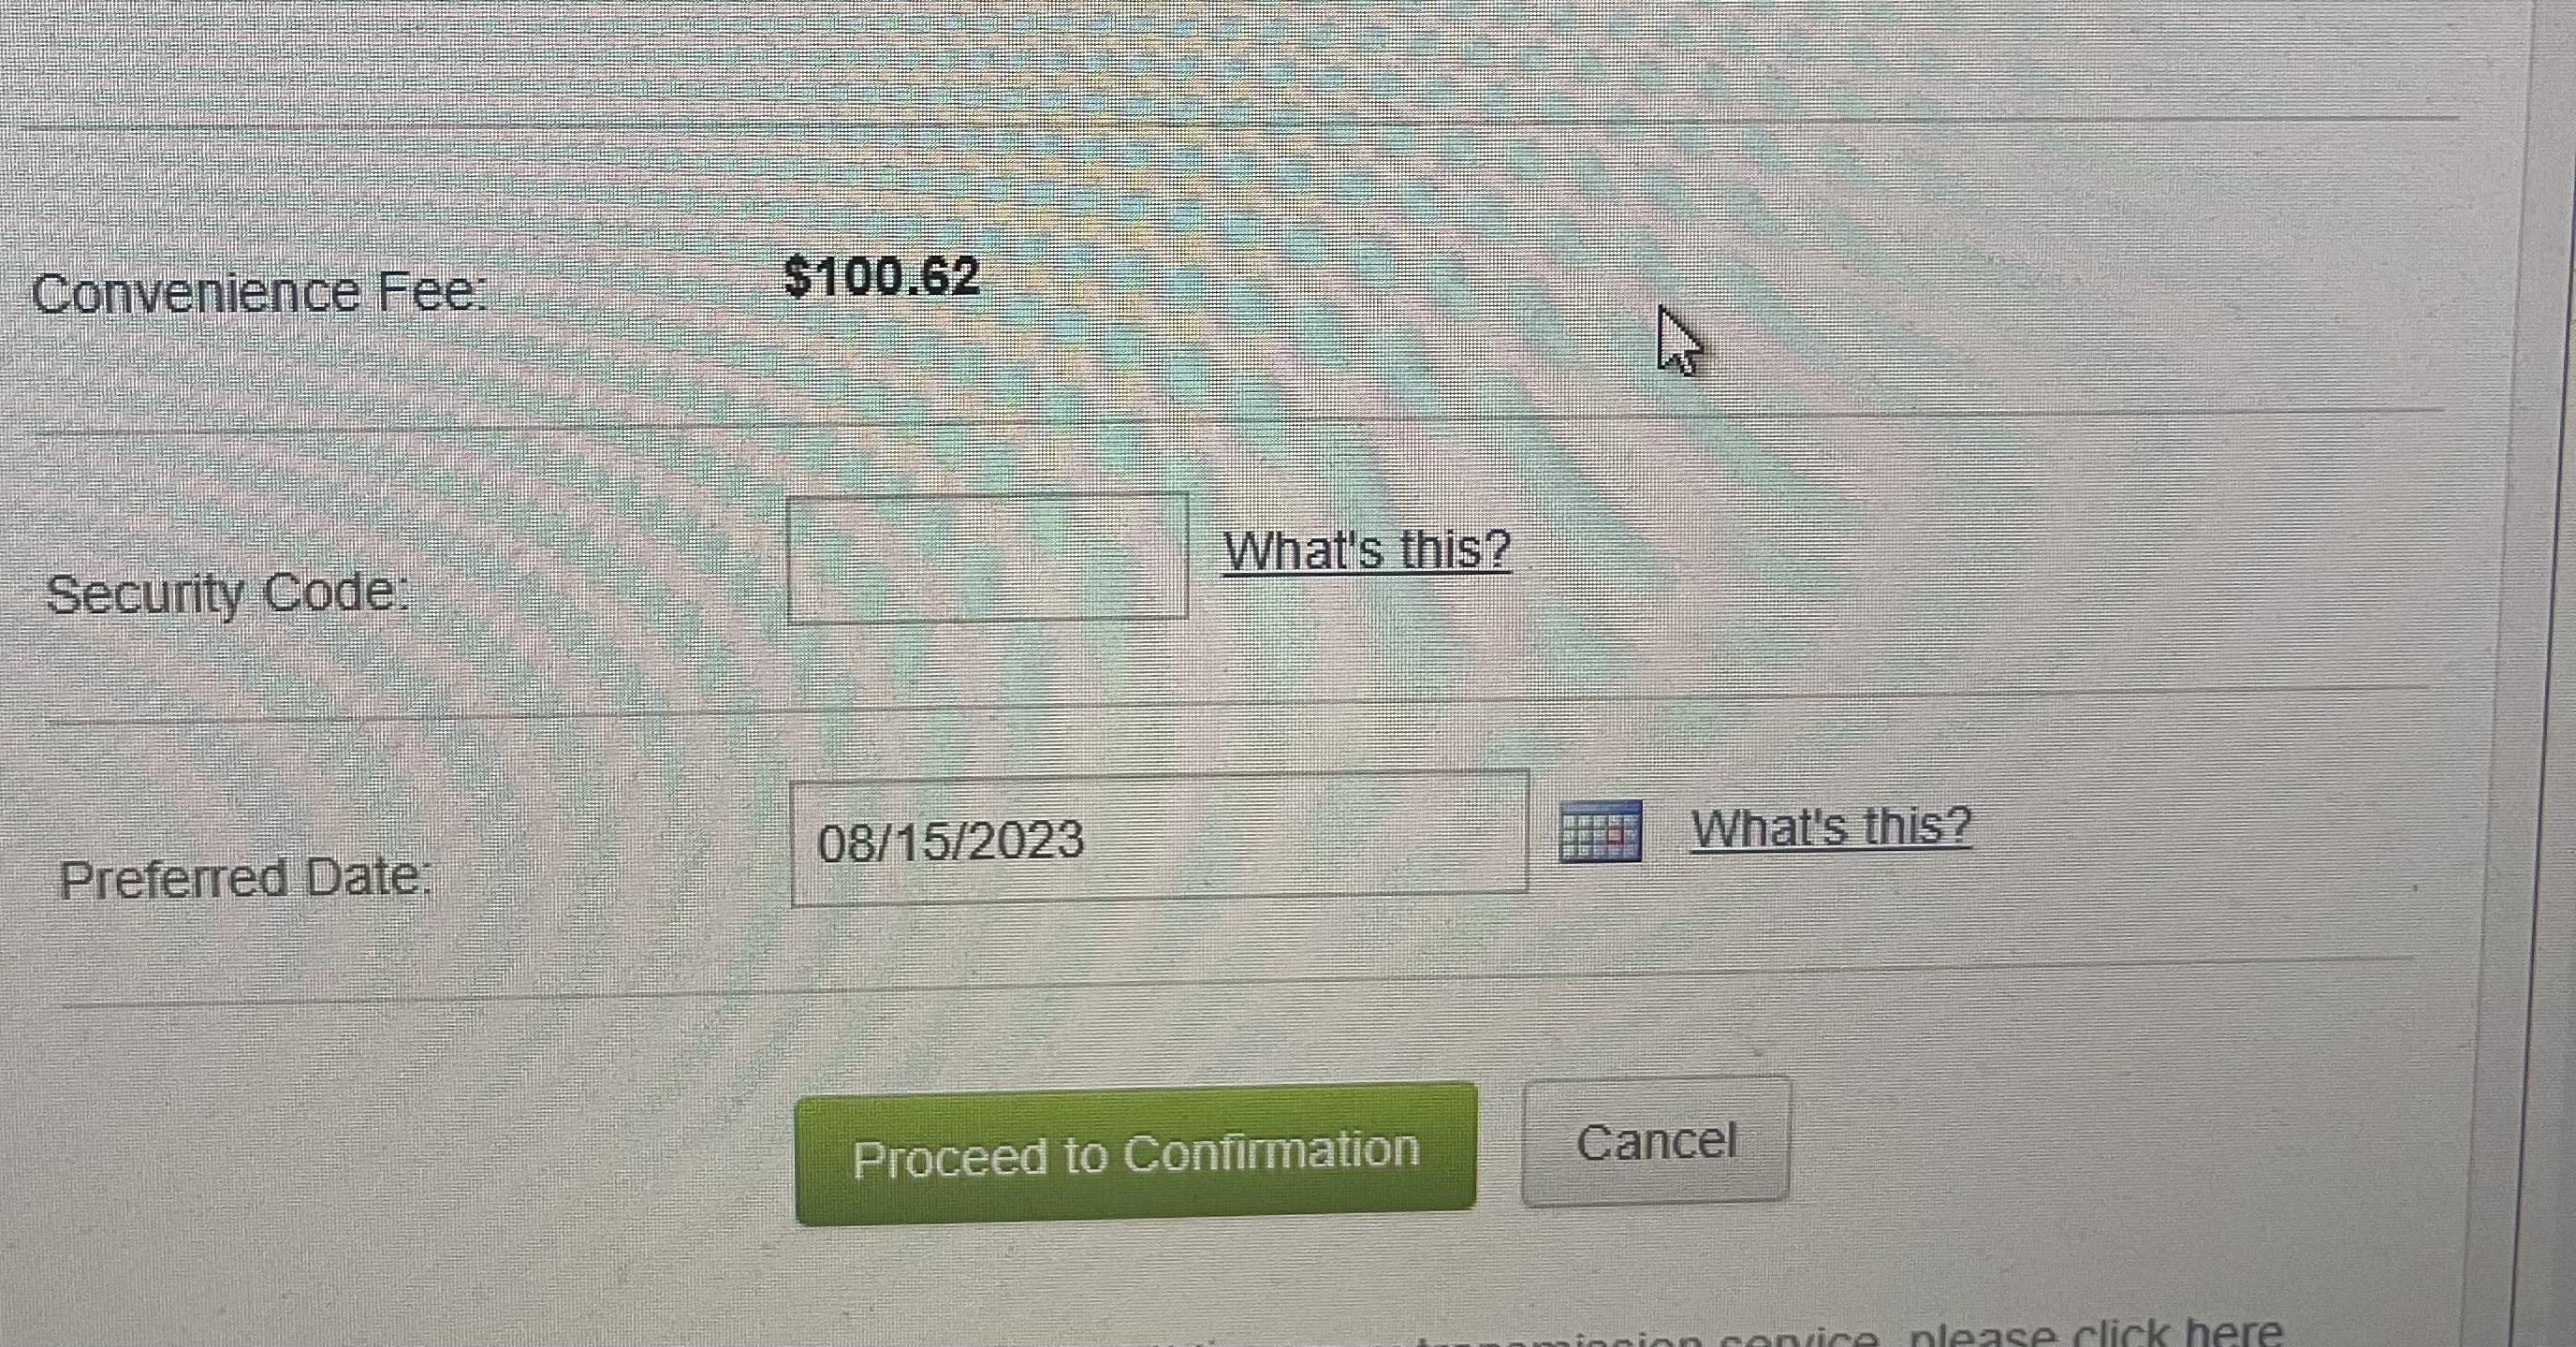 Someone is attempting to pay their rent online, and a $100 convenience fee is included in the charges